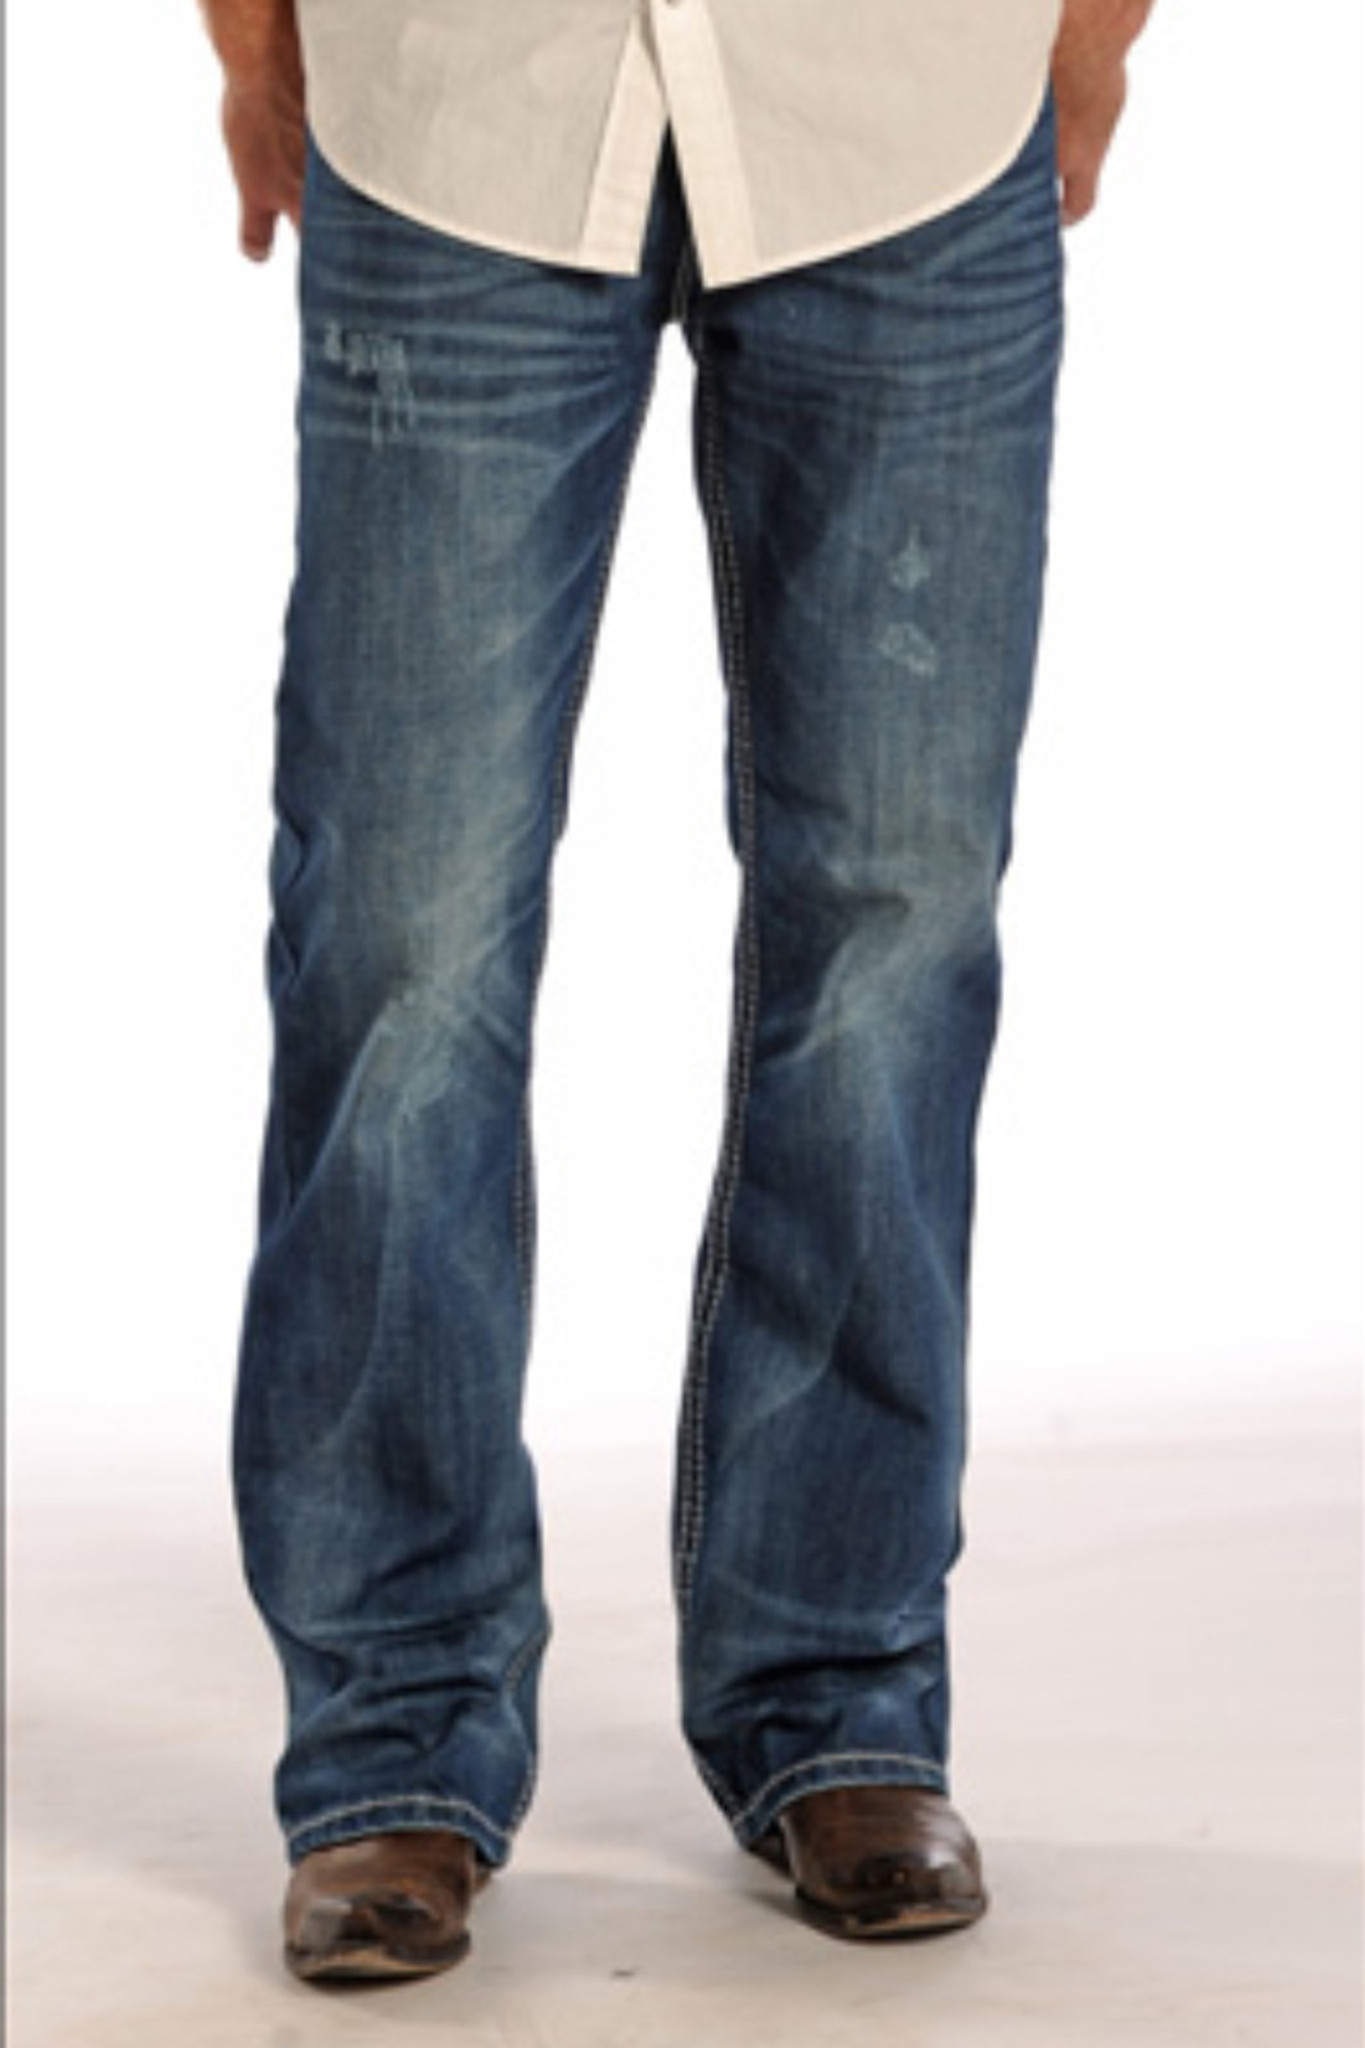 tragt Udvinding maternal Men's Rock & Roll Jeans, Relaxed, Boot Cut, Dark Wash, Tan Vintage - Chick  Elms Grand Entry Western Store and Rodeo Shop